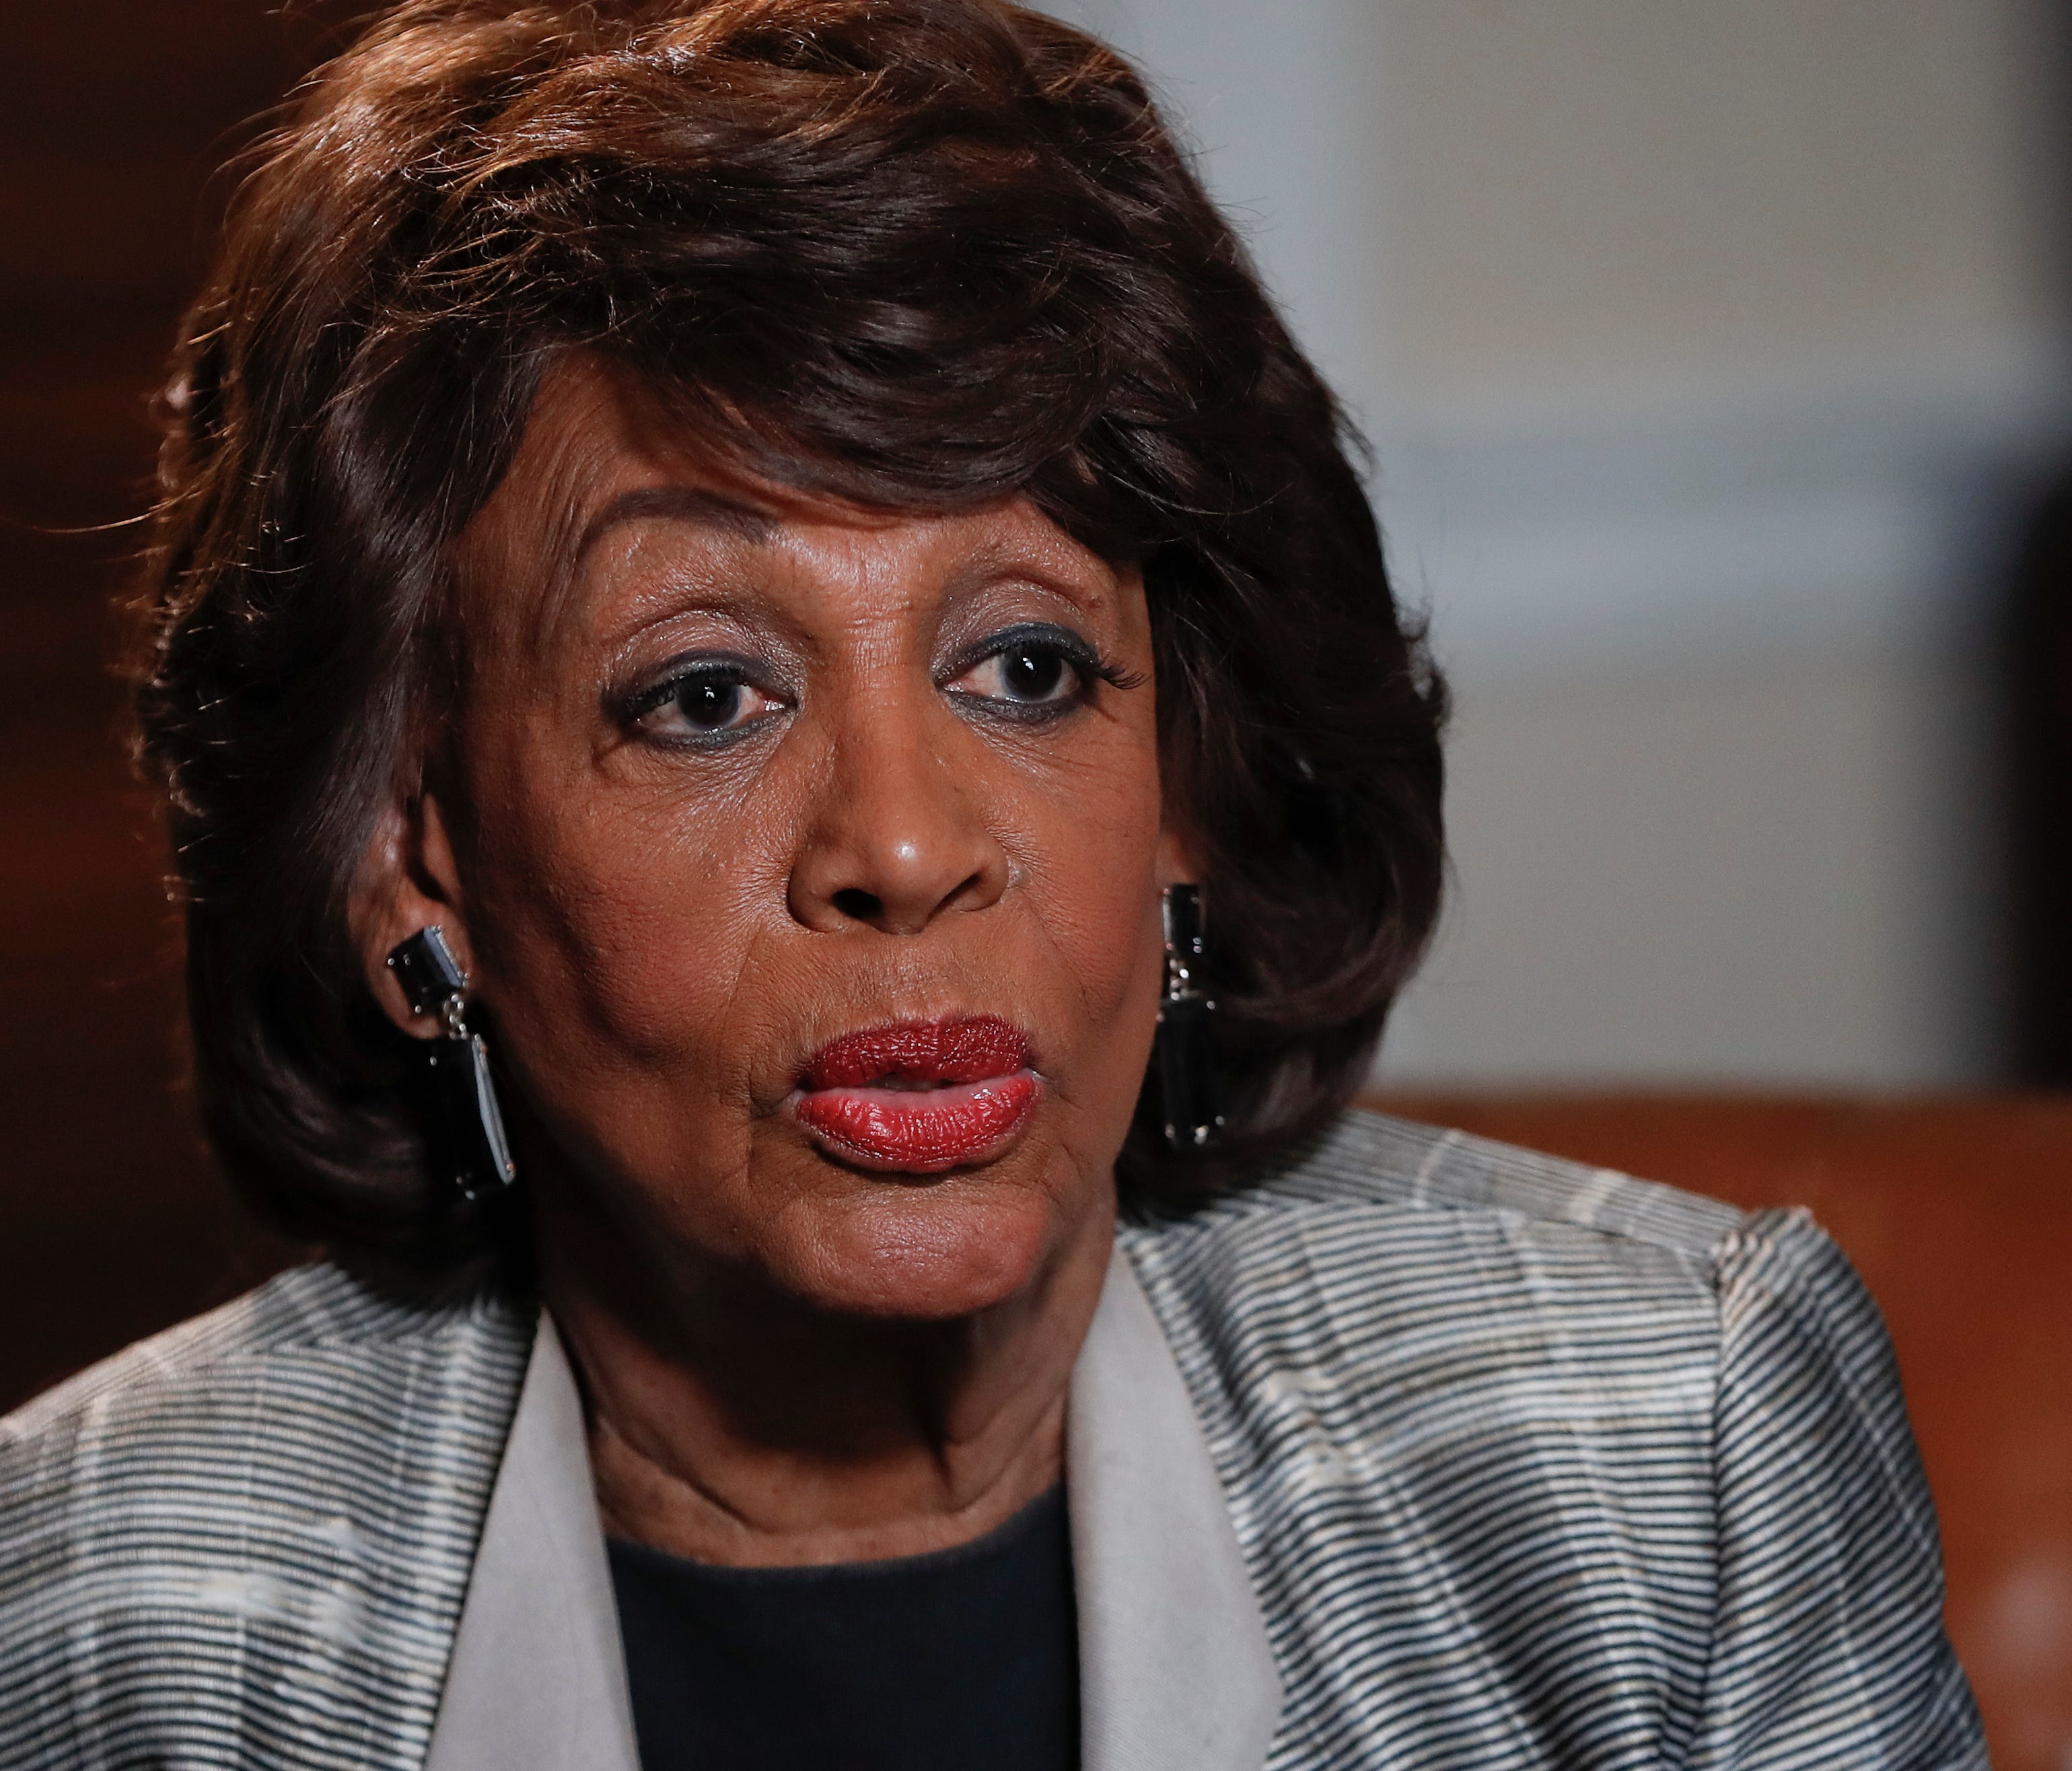 Rep. Maxine Waters, D-Calif., speaks during her interview with the Associated Press at her congressional office on Capitol Hill in Washington, March 23, 2017.